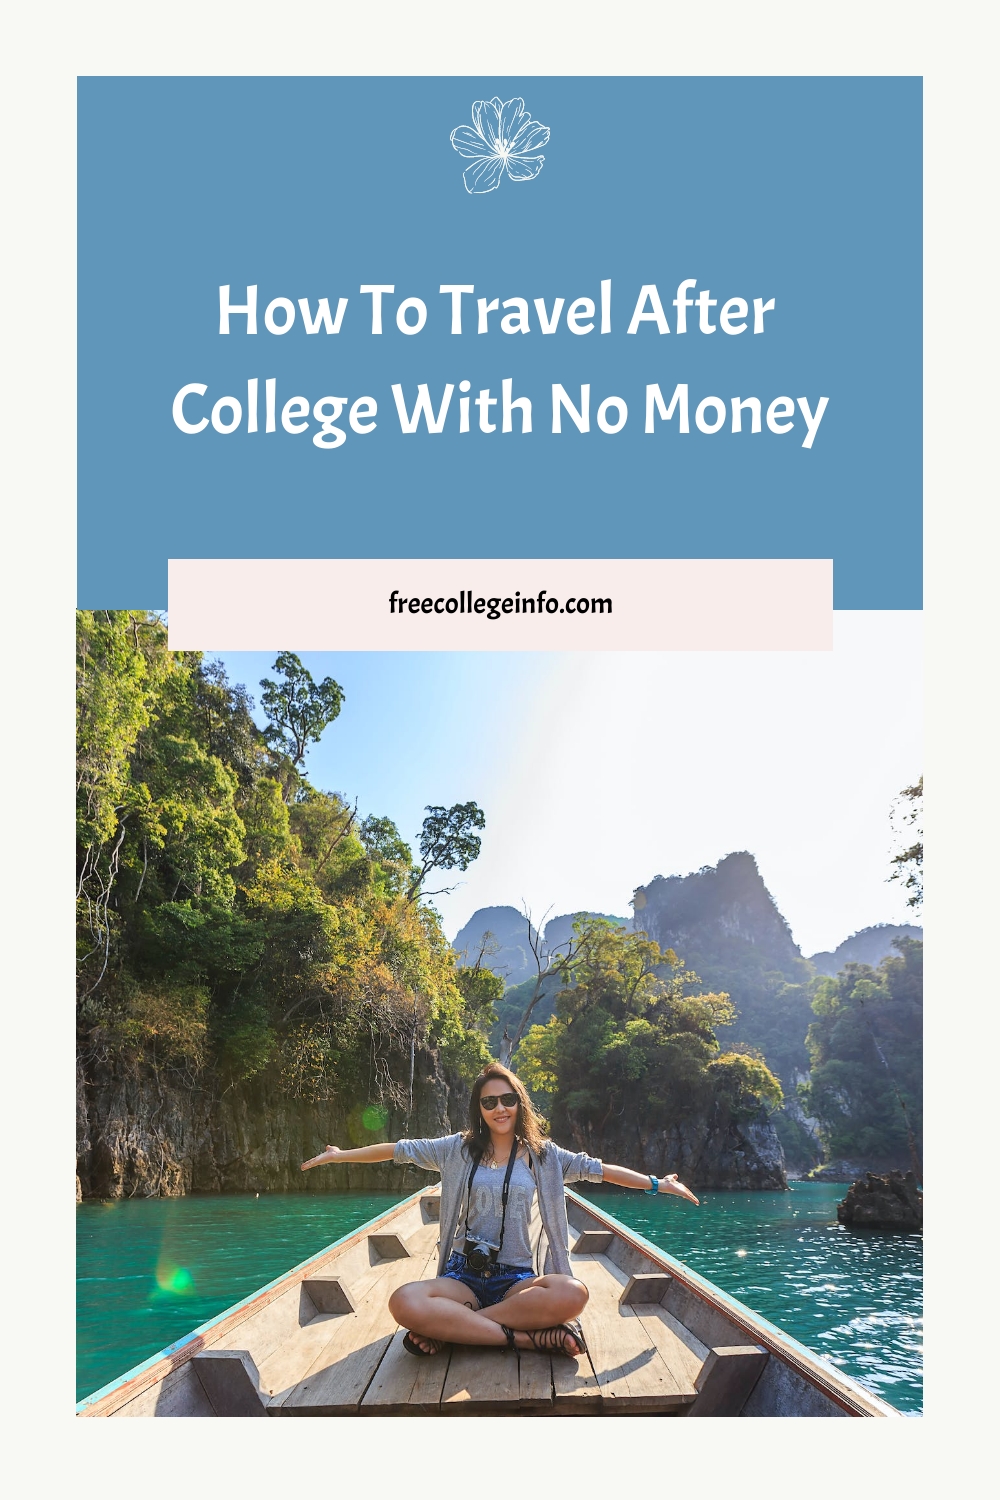 How To Travel After College With No Money